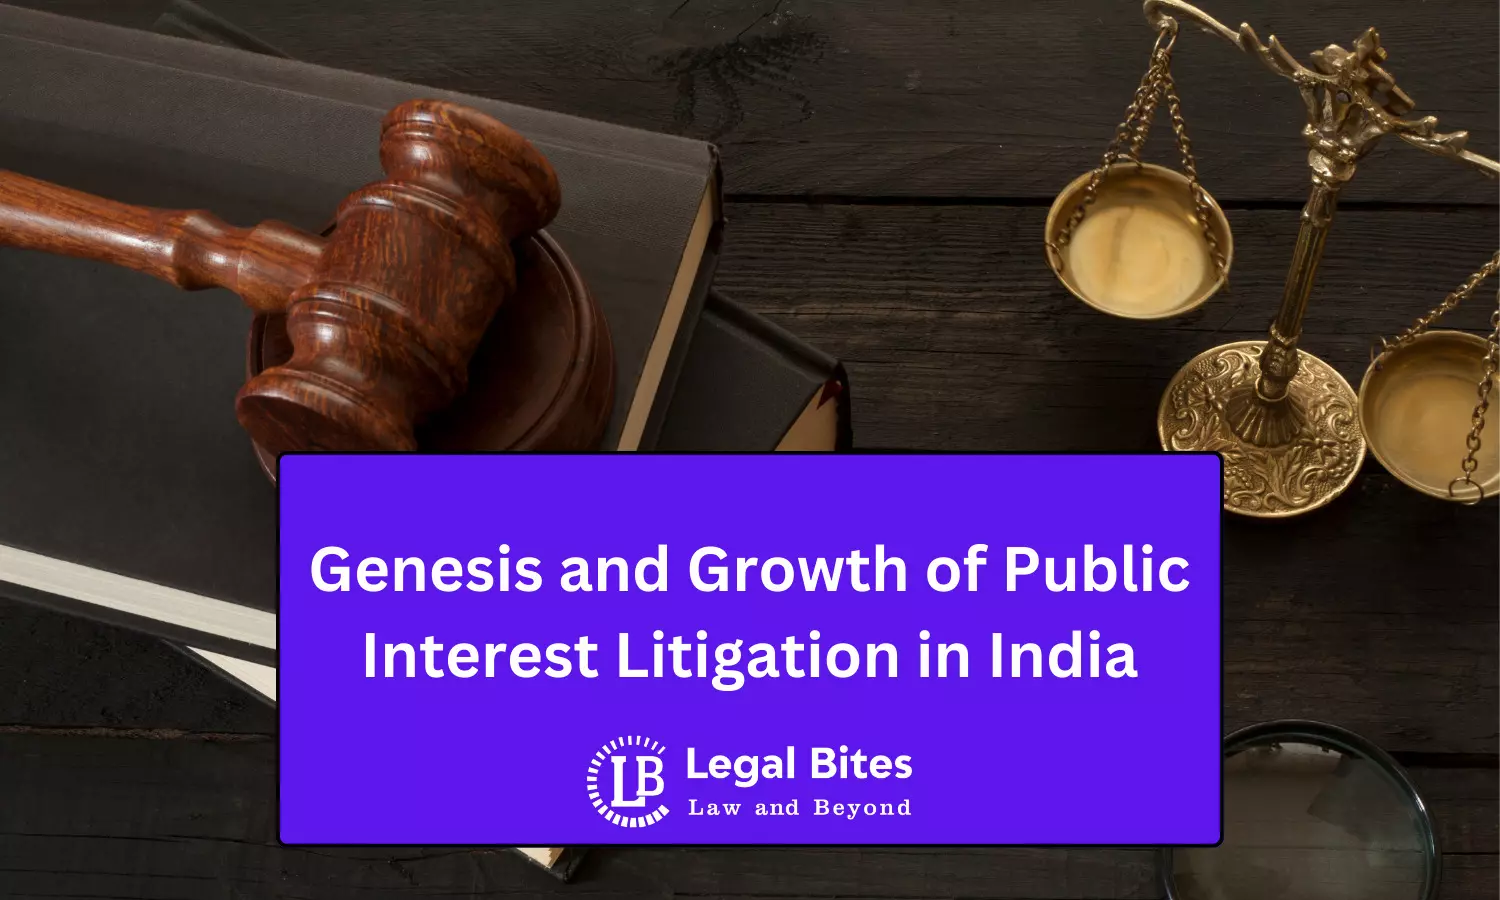 Genesis and Growth of Public Interest Litigation in India